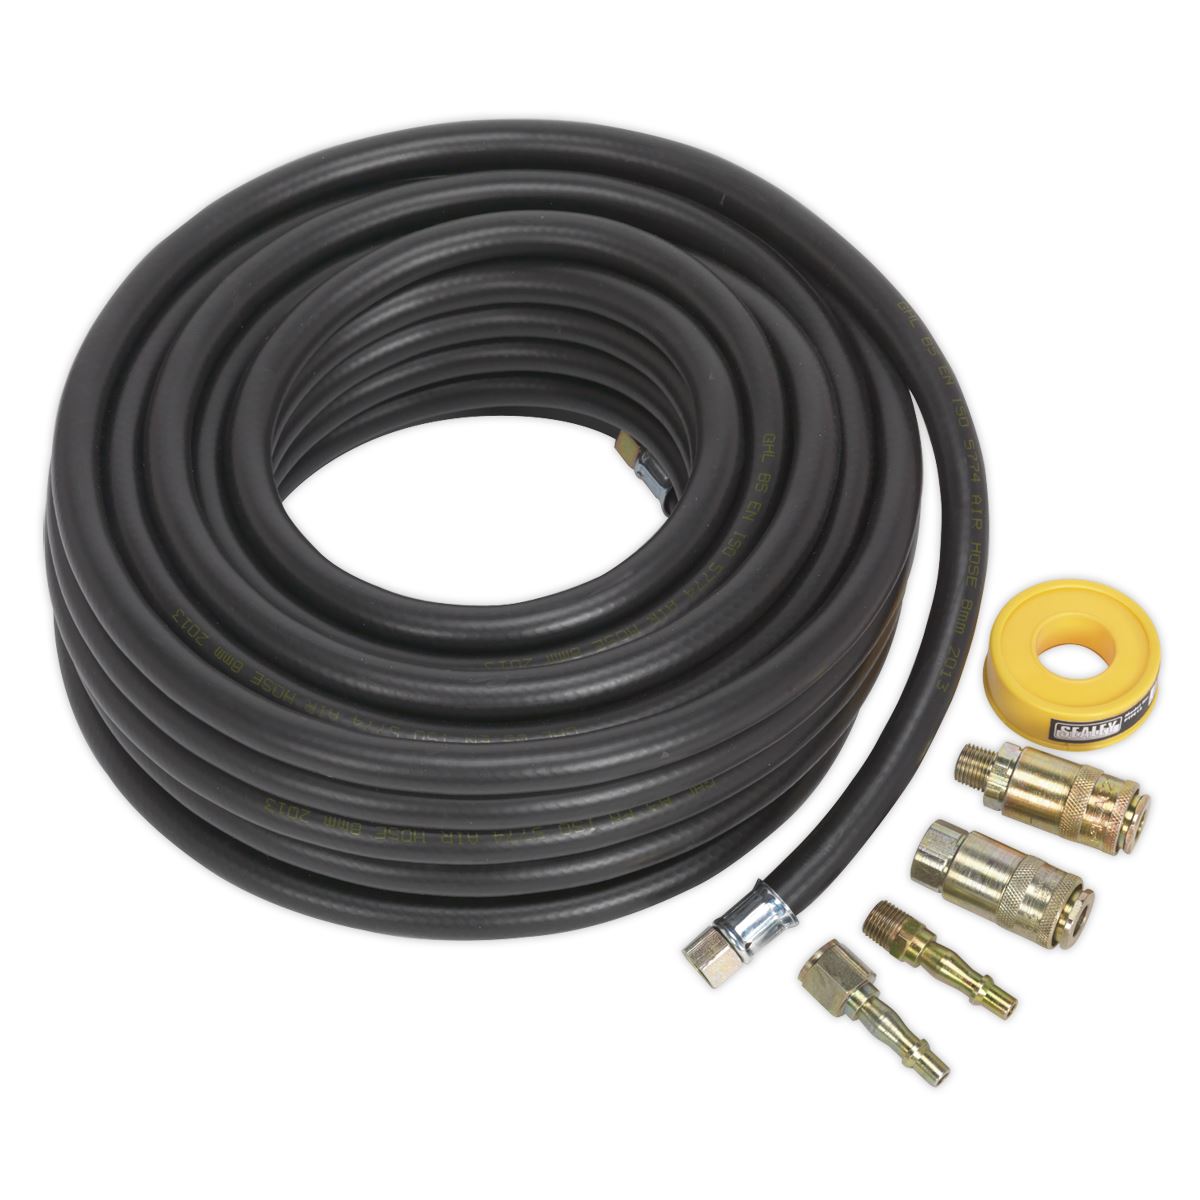 Sealey Air Hose Kit 15m x Ø8mm with Connectors